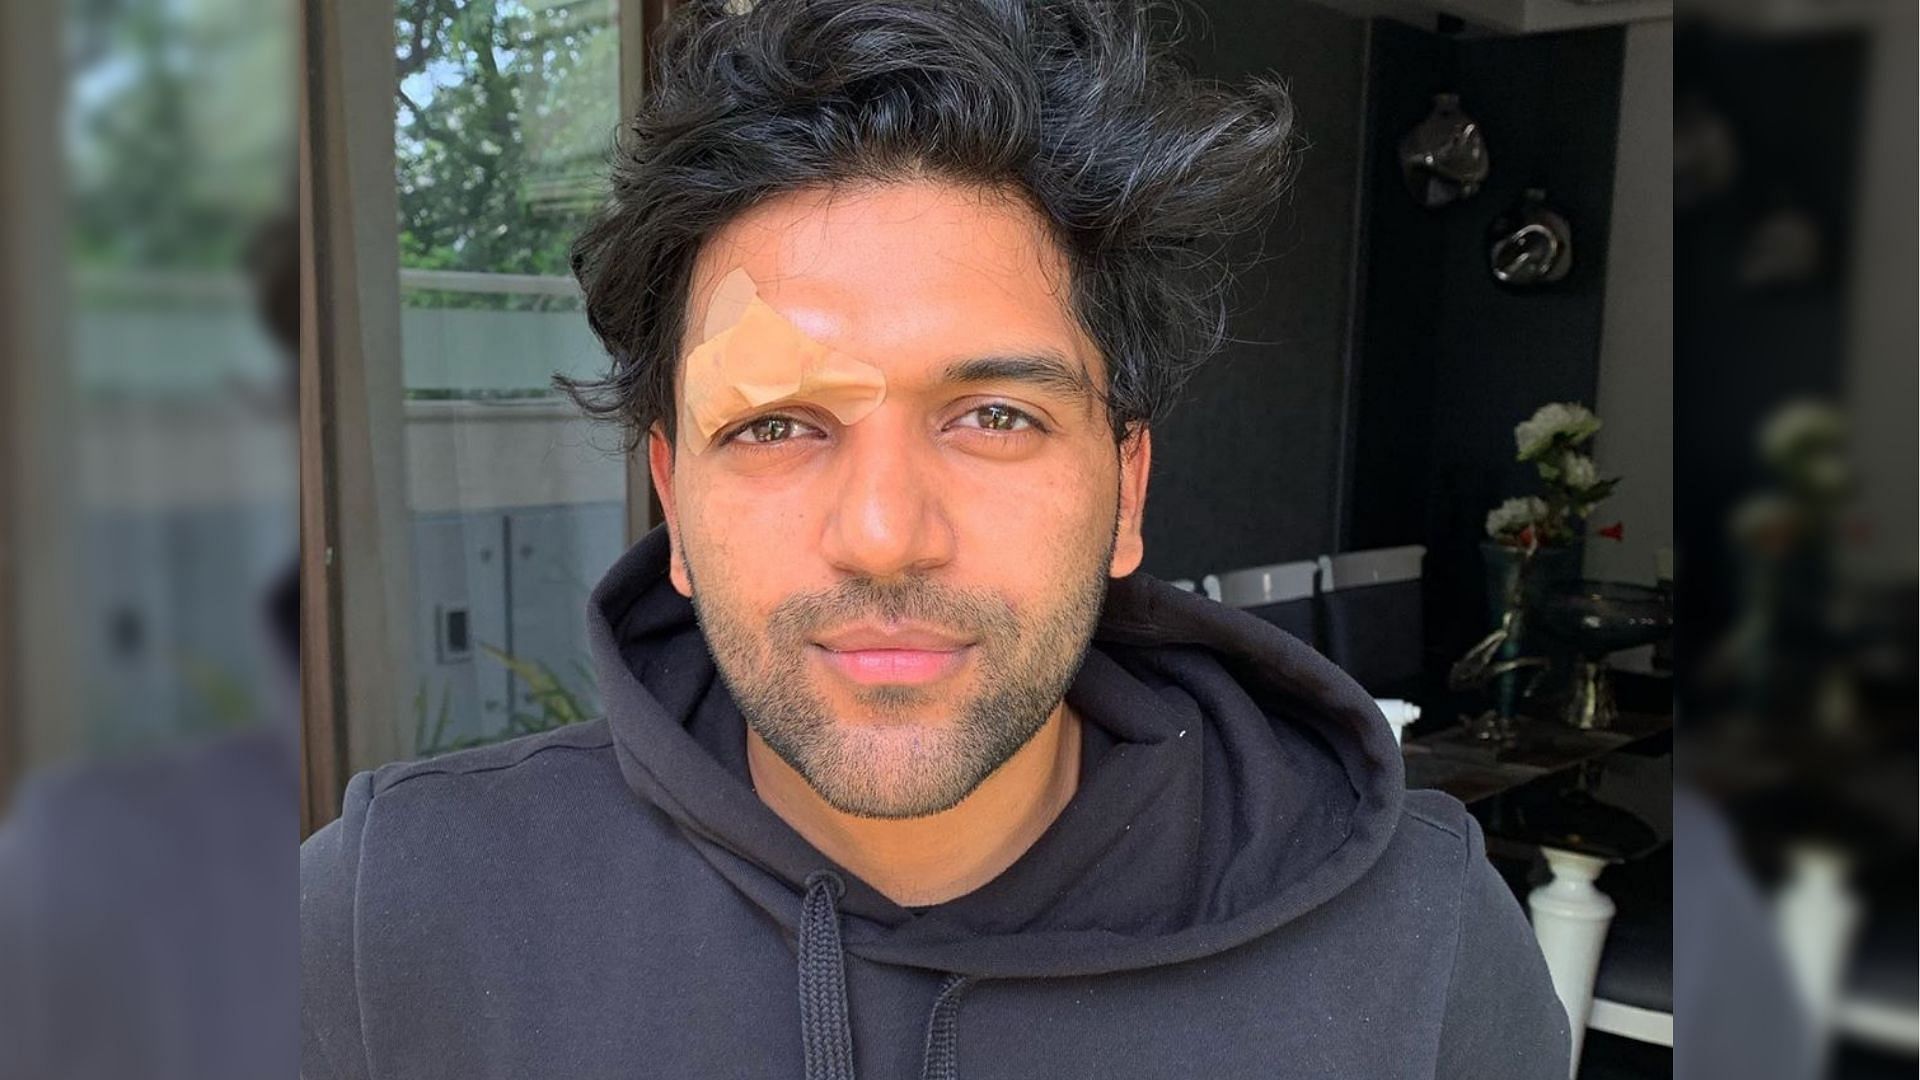 After being attacked by an unknown assailant after a concert in Vancouver, singer Guru Randhawa is back in India